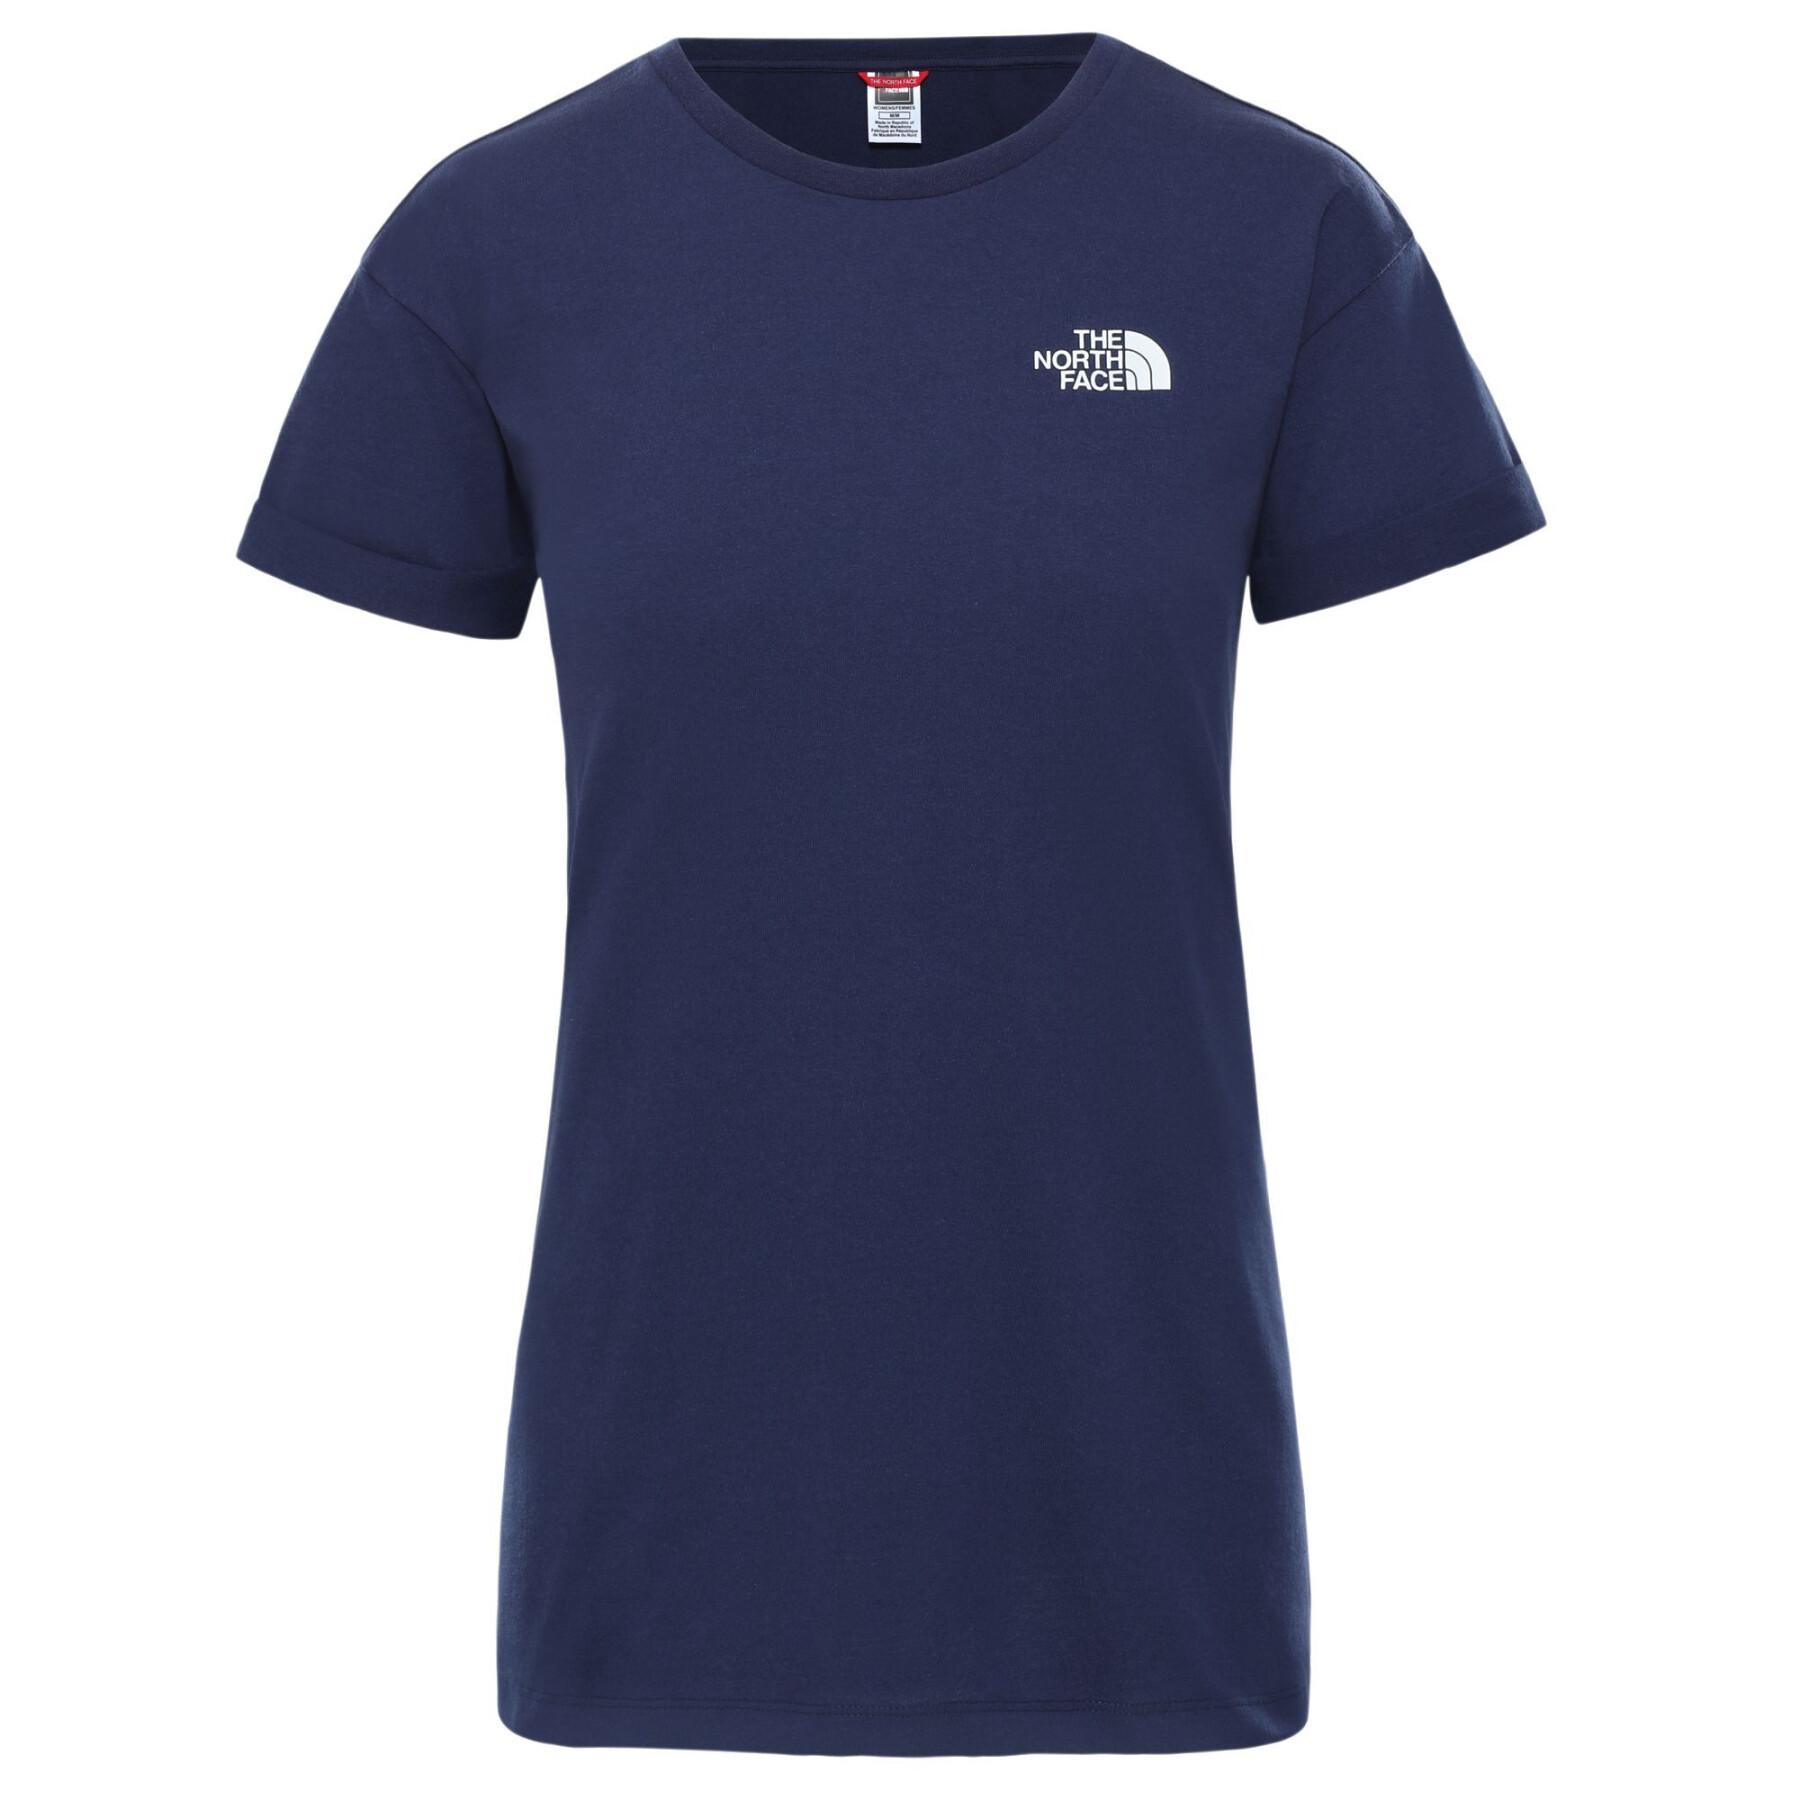 Camiseta de mujer The North Face Tissaack